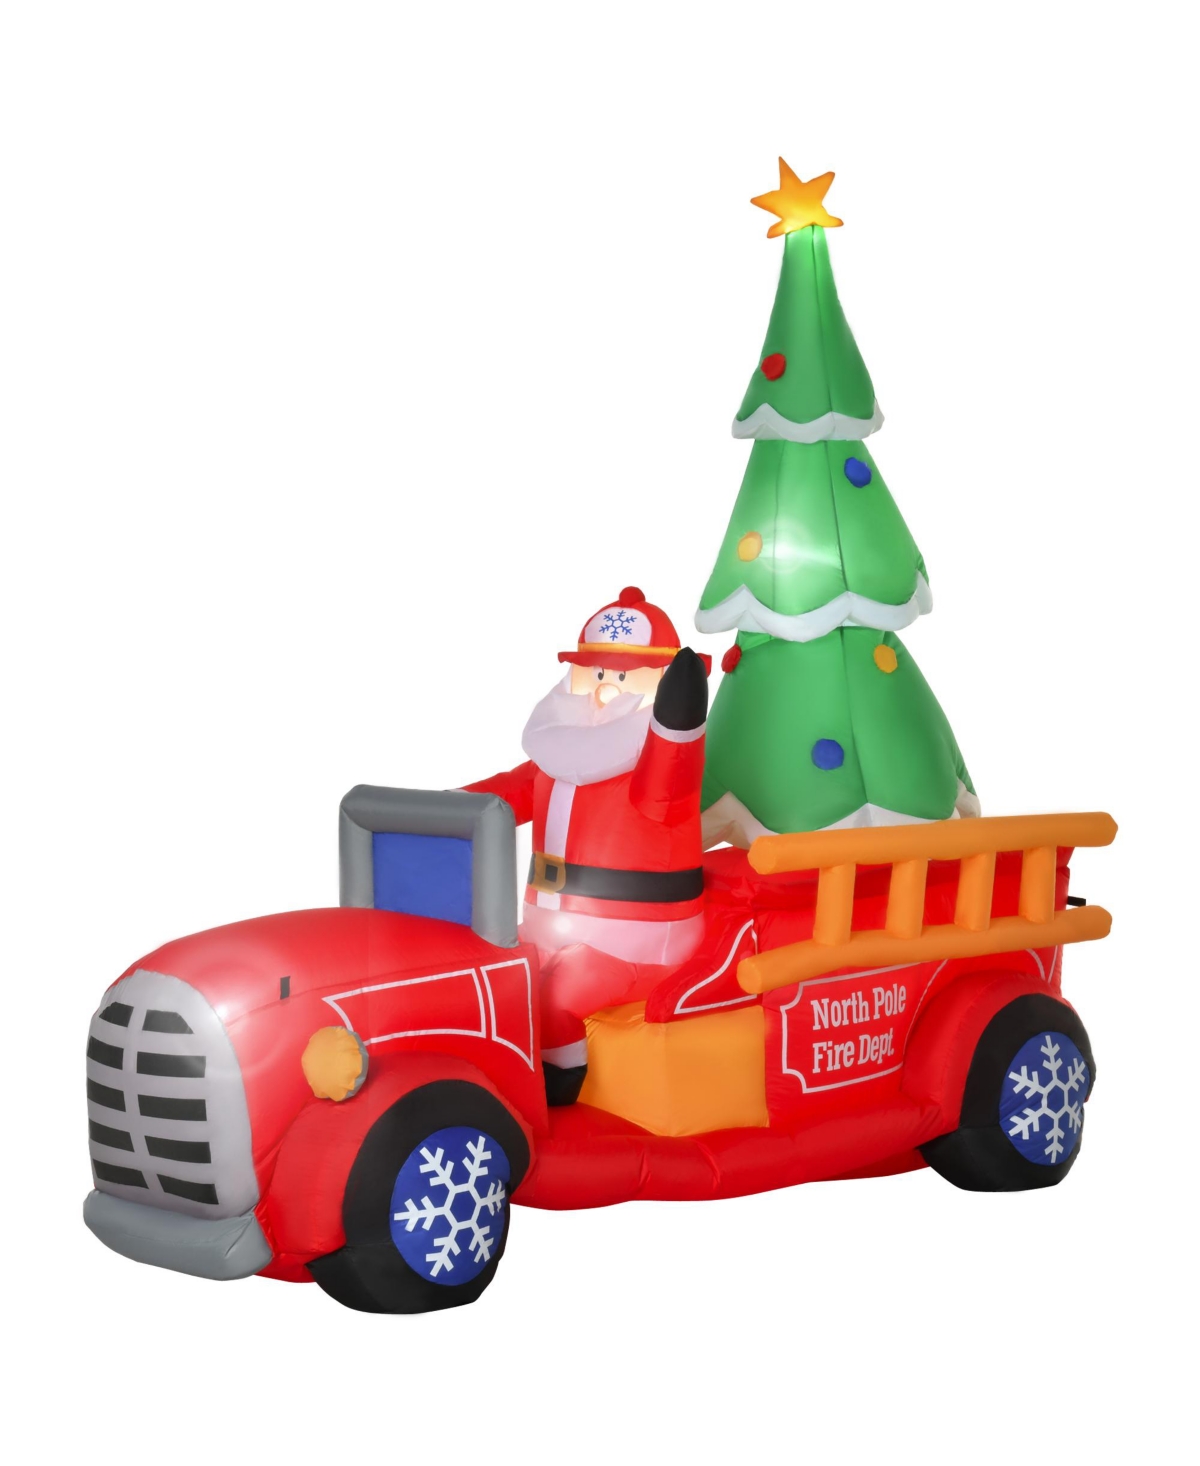 7.5' Christmas Inflatable Santa Claus Fire Truck Yard Decoration - Red